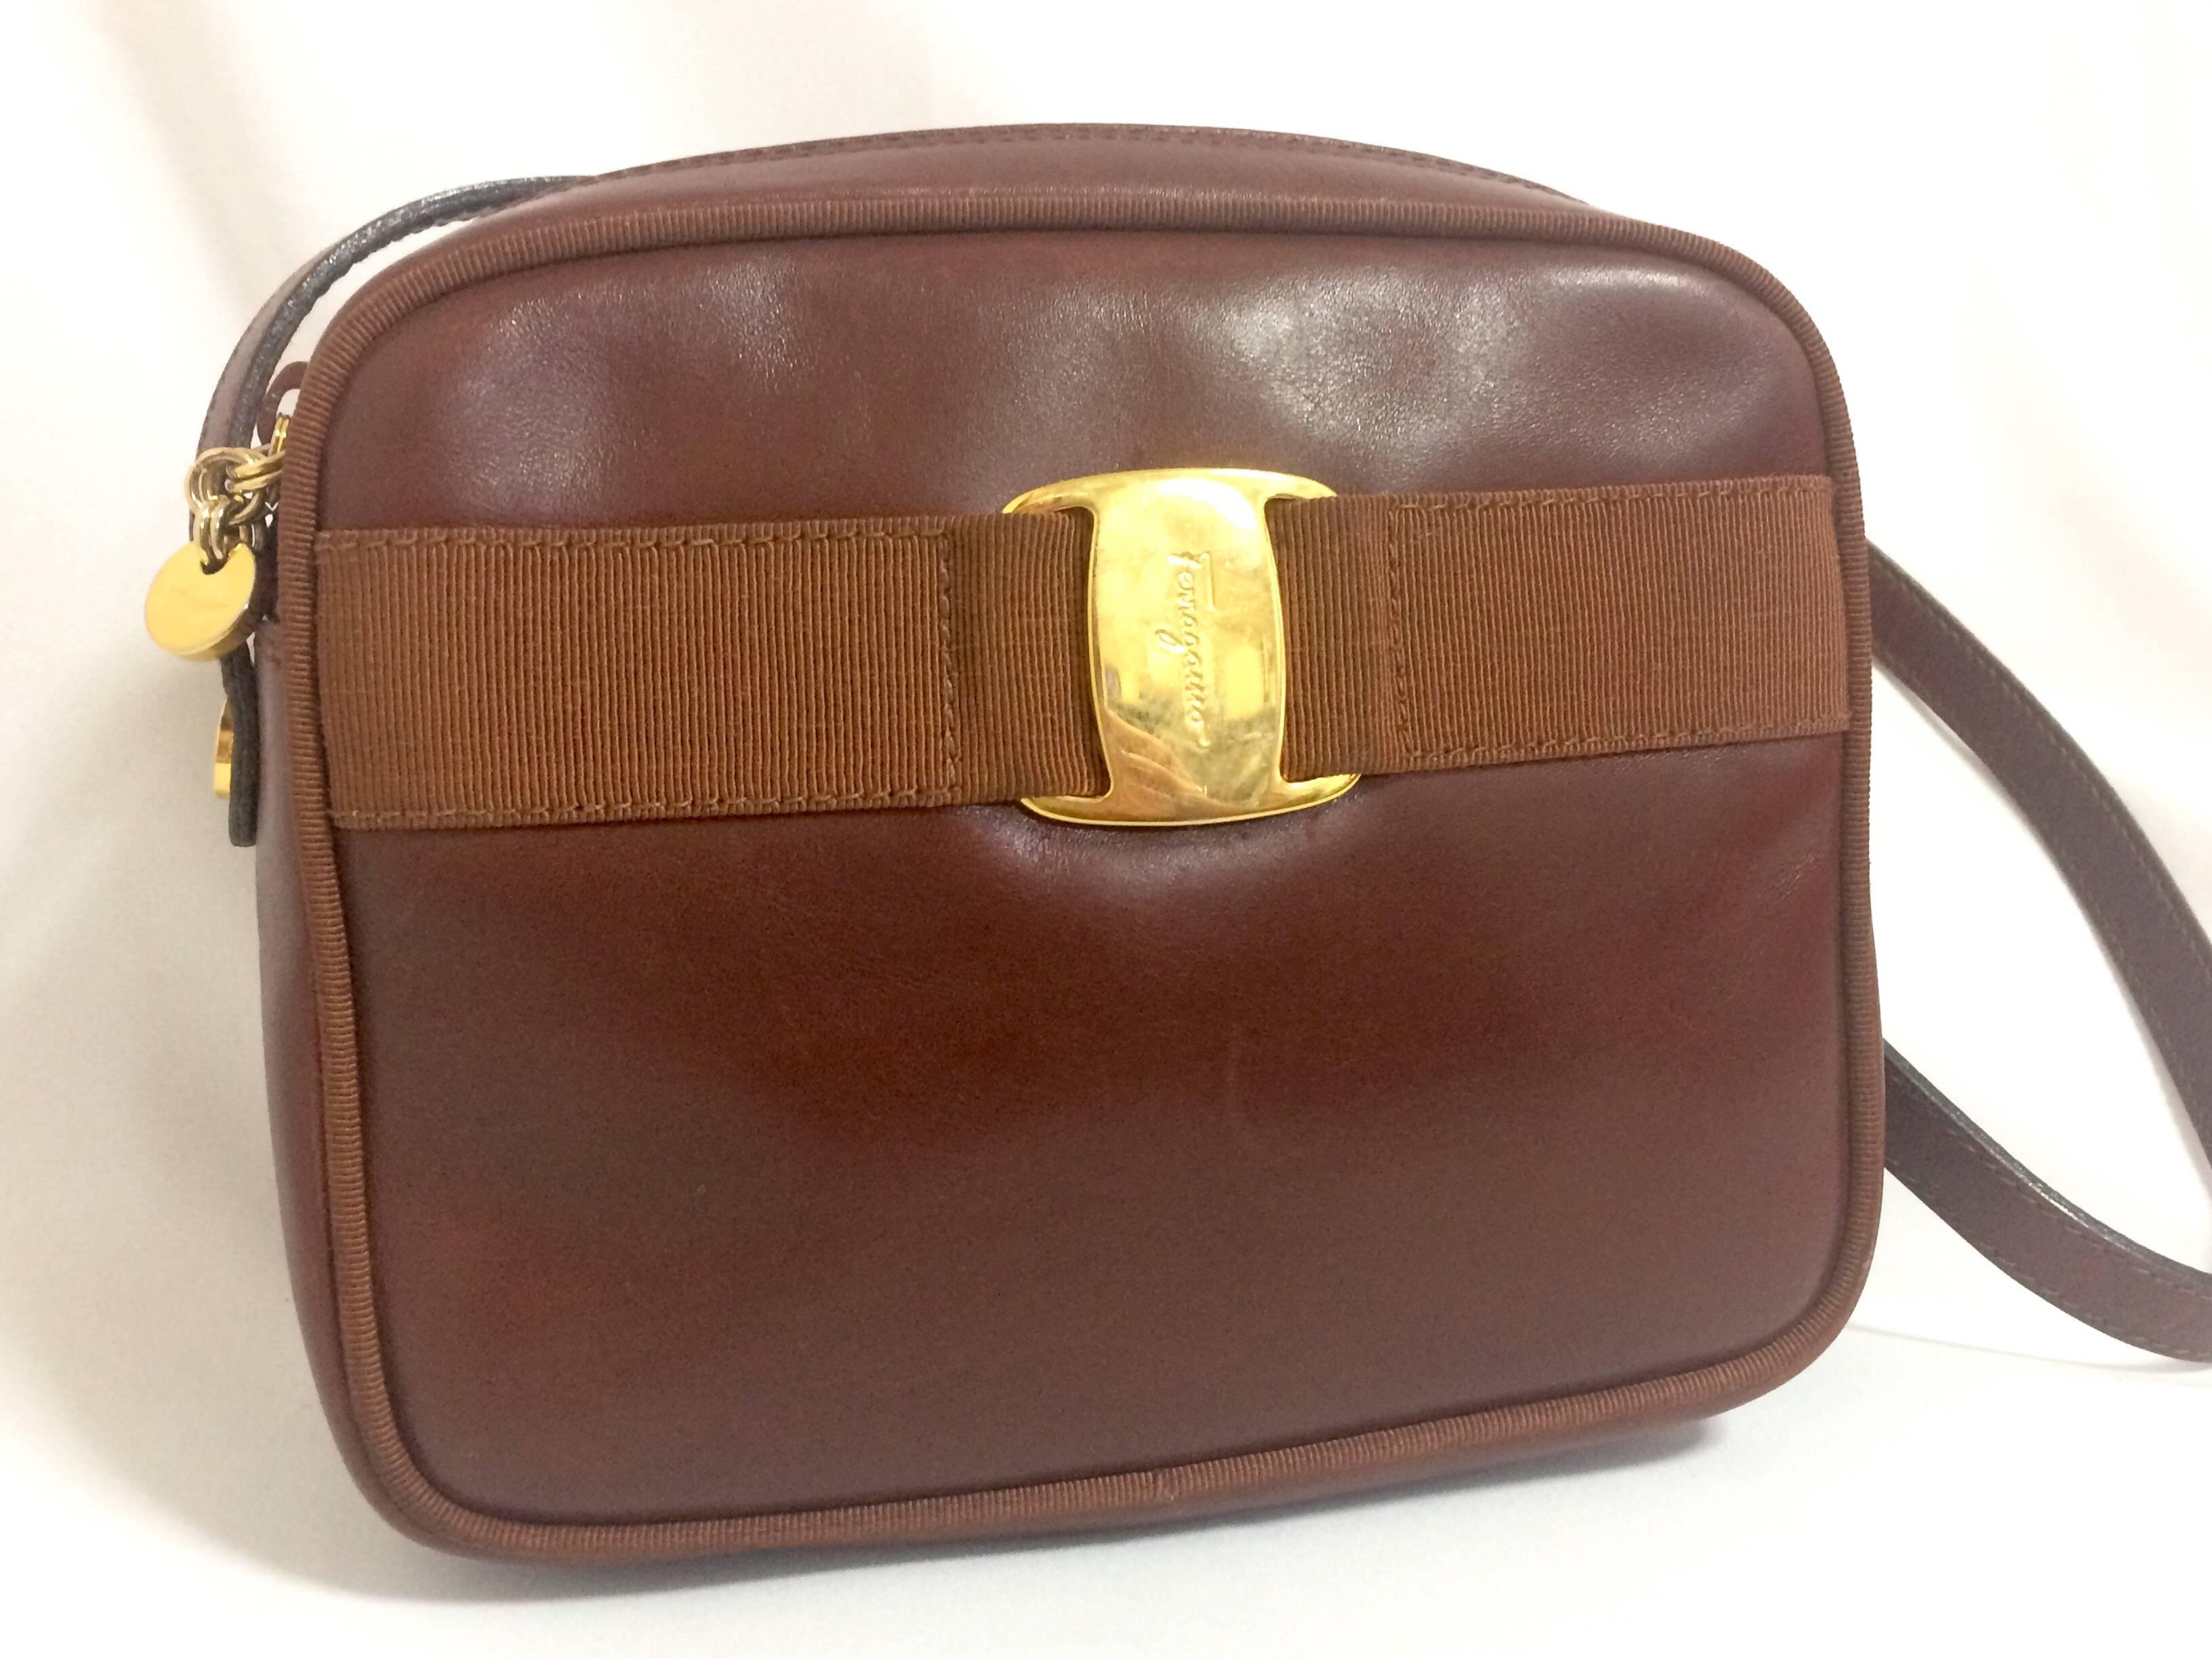 1990s. Vintage Salvatore Ferragamo vara collection brown leather purse with gold tone ferragamo charm.

This is a vintage Salvatore Ferragamo genuine brown leather shoulder bag from Vara Collection in the 90's. Perfect daily use shoulder